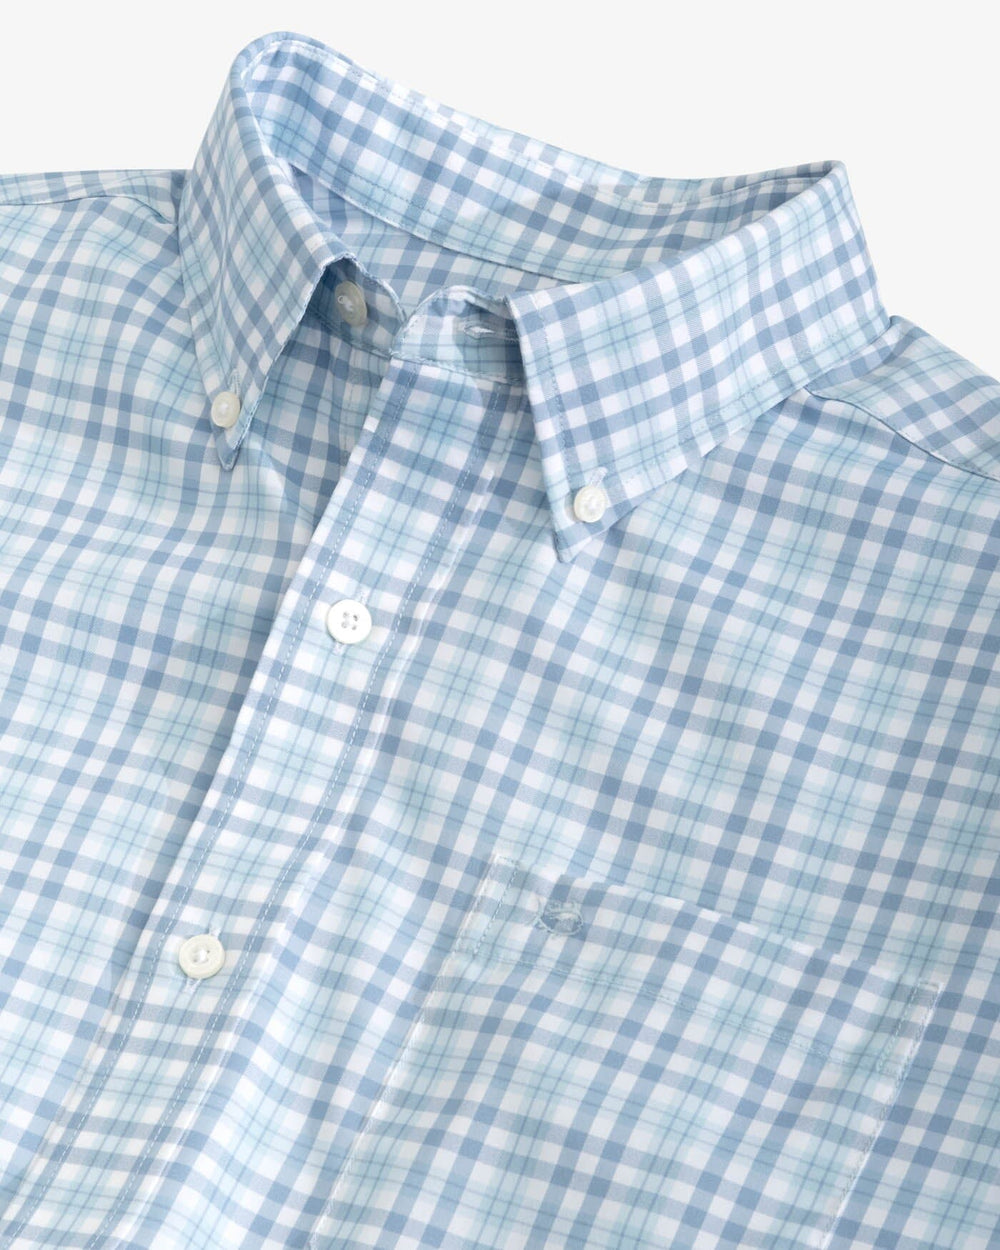 The detail view of the Southern Tide Haywood brrr Plaid Intercoastal Sport Shirts by Southern Tide - Dream Blue